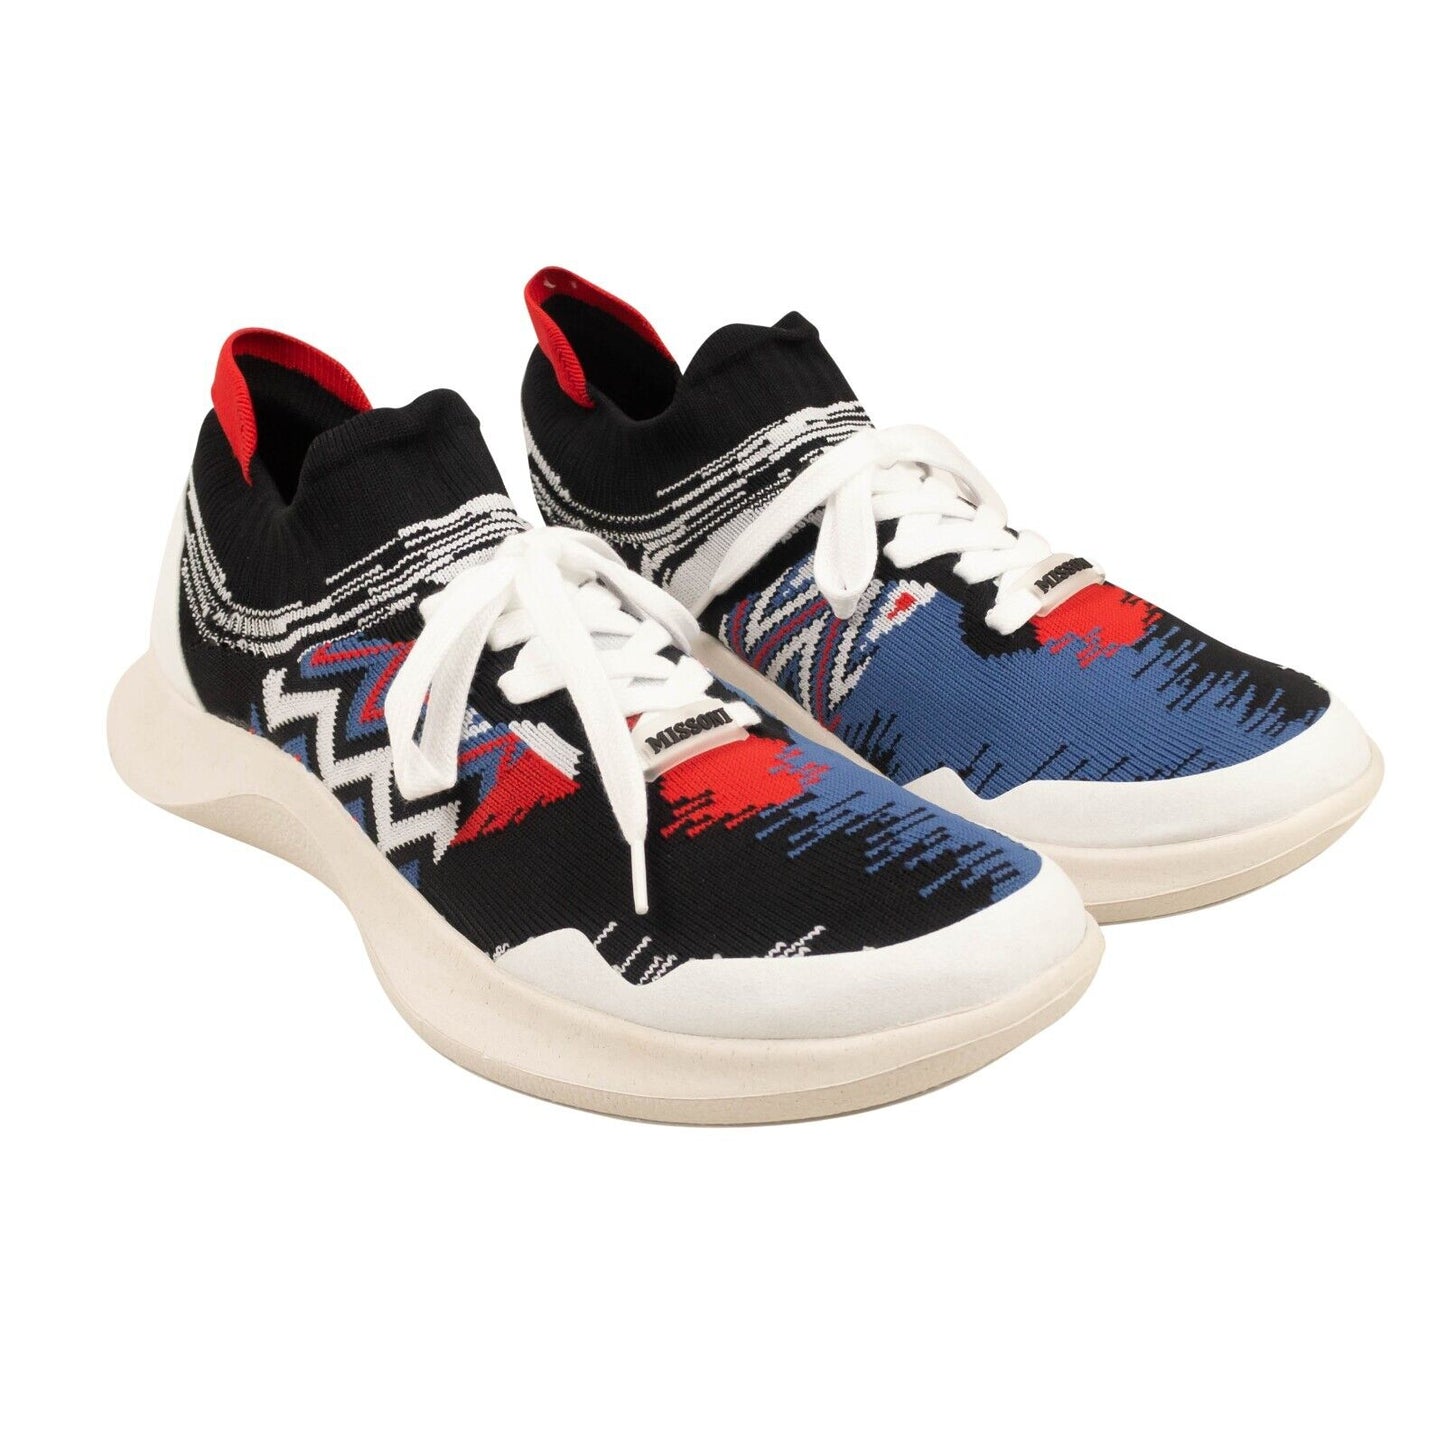 Missoni Acbc"" Fly Knit Sneakers - Black/Red